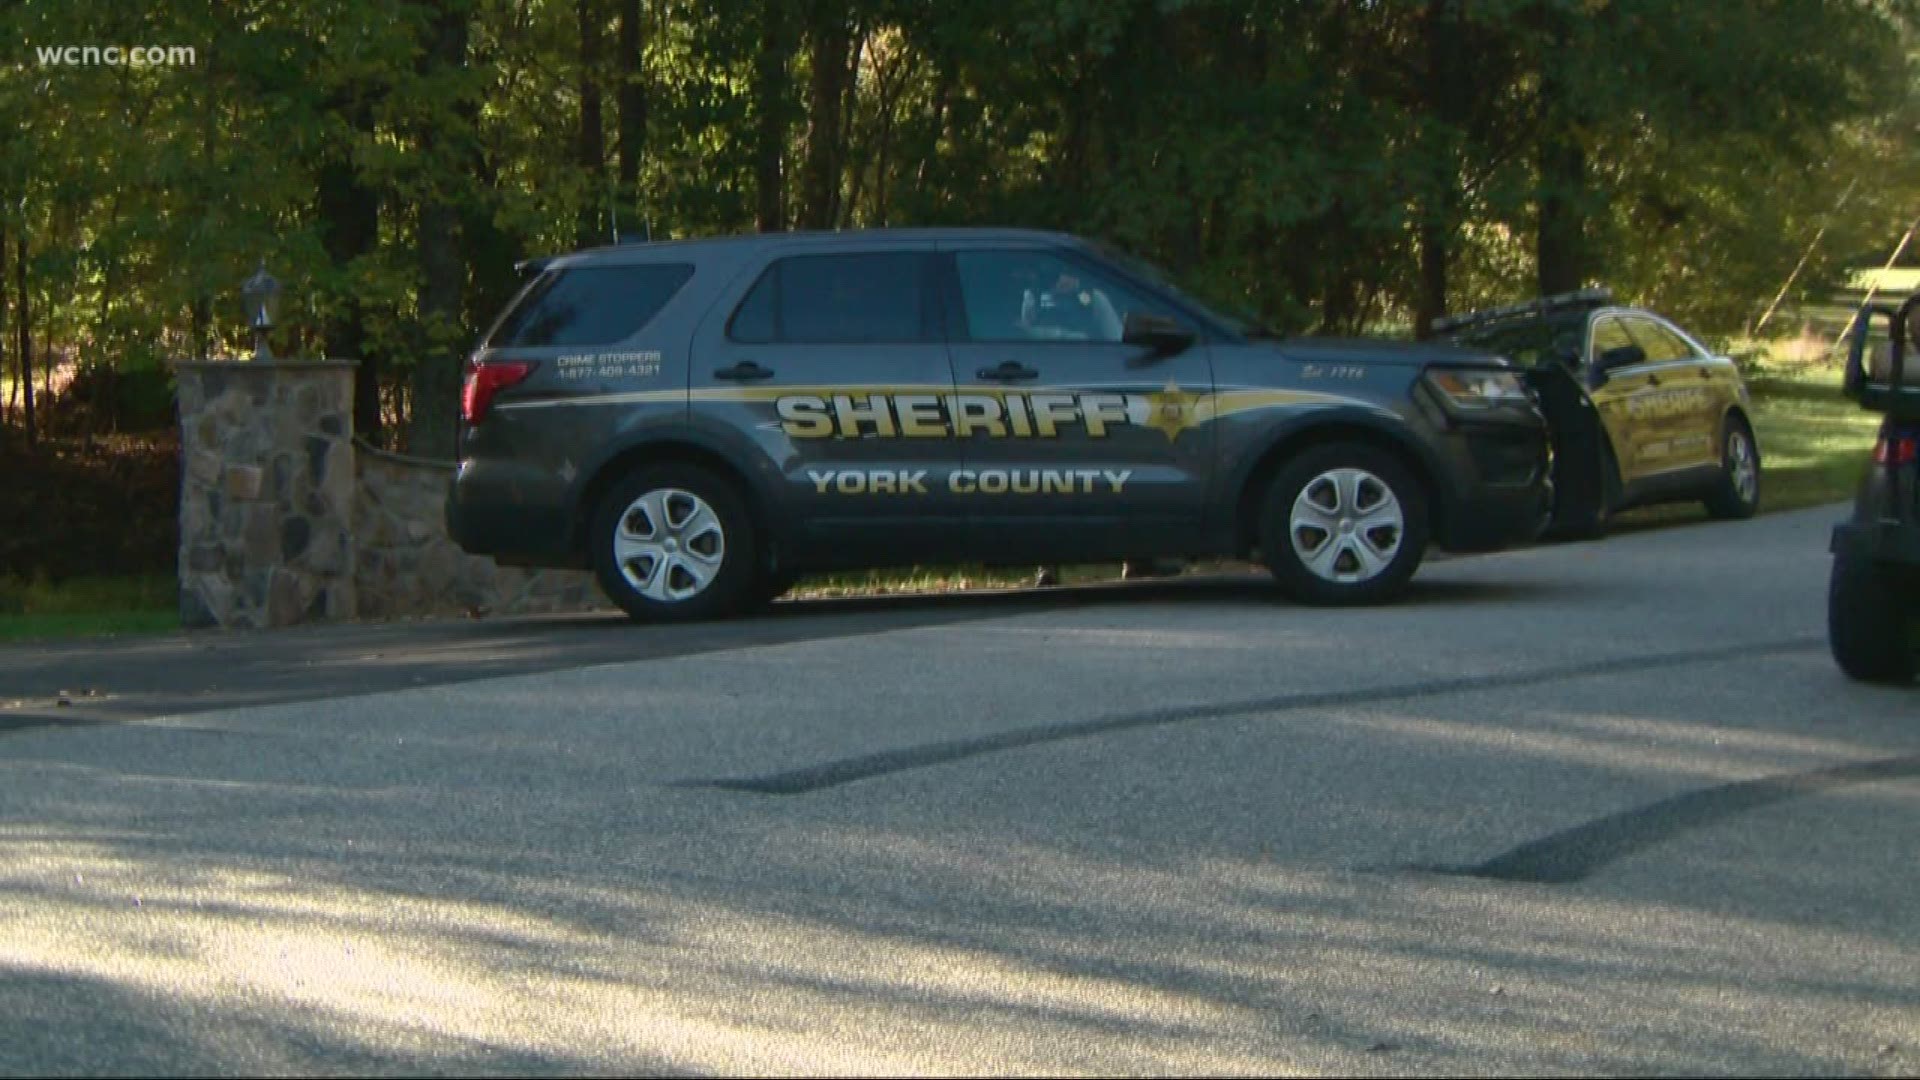 The York County Sheriff issued an alert earlier in the day that the girl was missing, and hours later they recovered her body in the water in Lake Wylie.